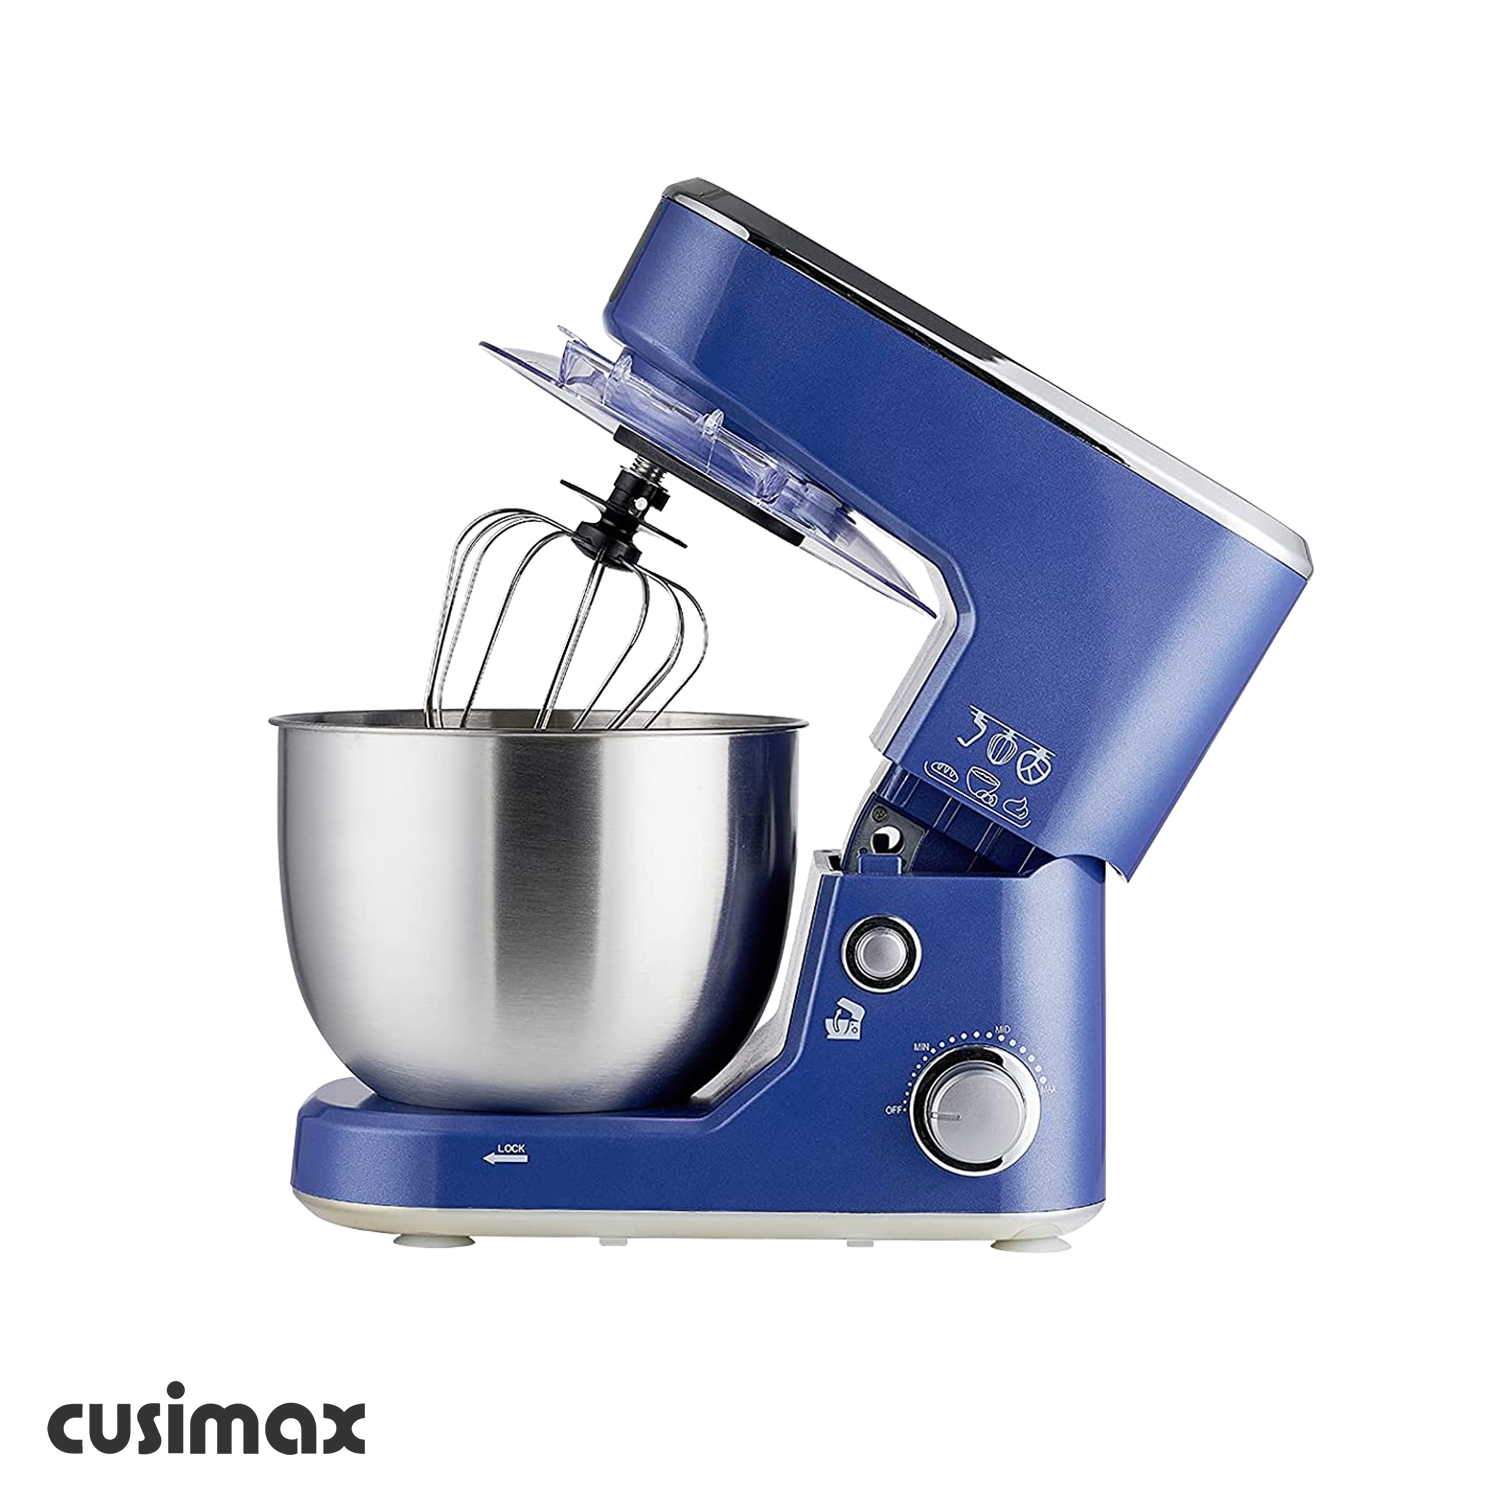 Cusimax Sapphire Blue Stand Mixer With 5-Quart Stainless Steel Bowl-Cusimax